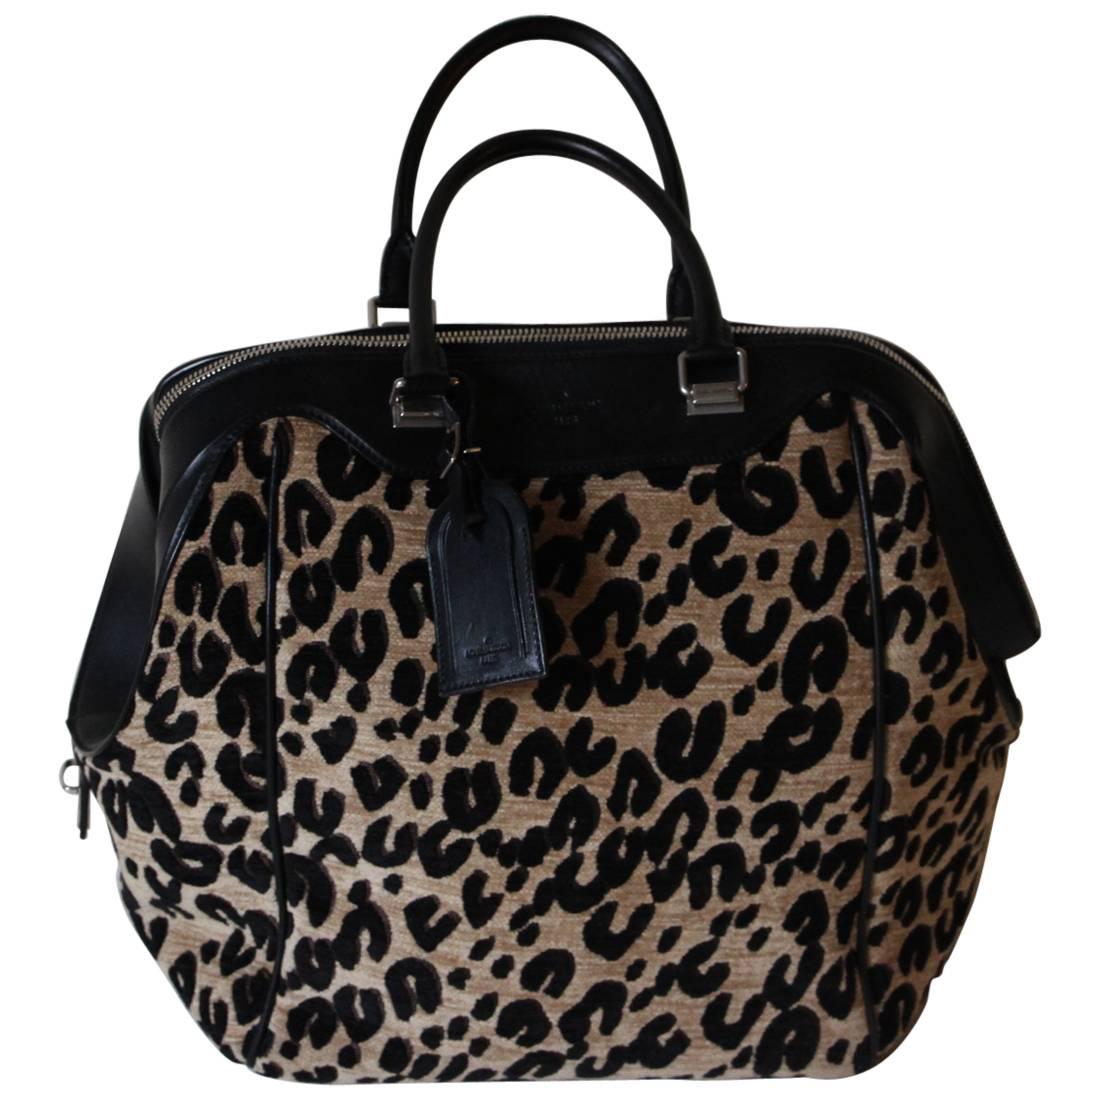 Louis Vuitton Bag Limited Edition "North South" Leopard Canvas And Black Leather